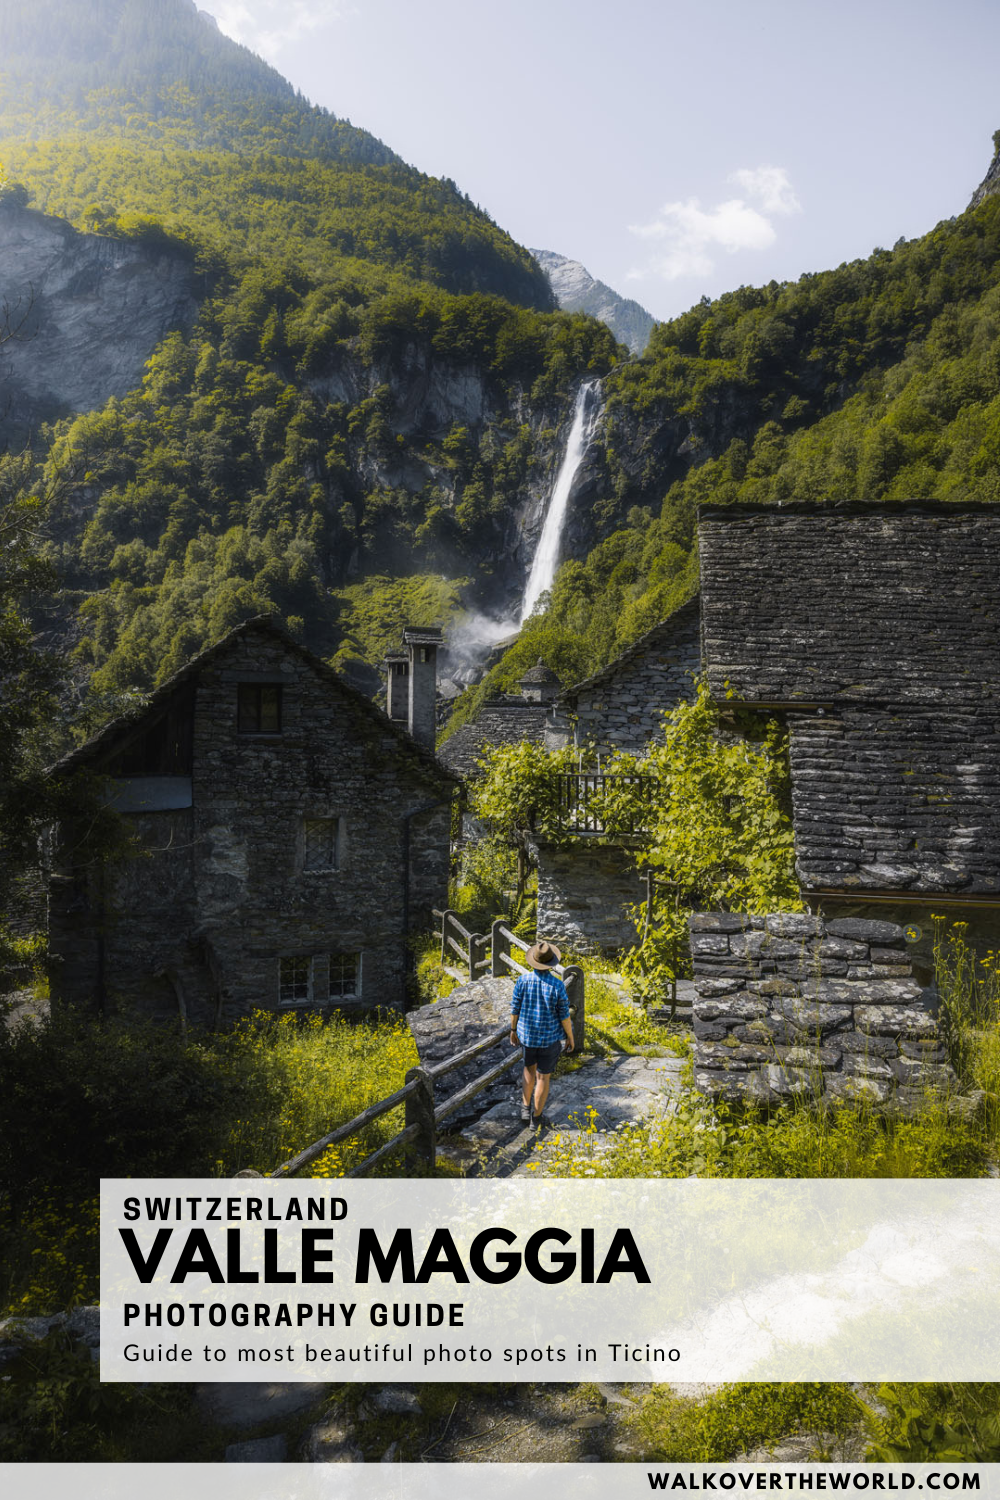 Valle Maggia Travel and Photography Spots and Locations